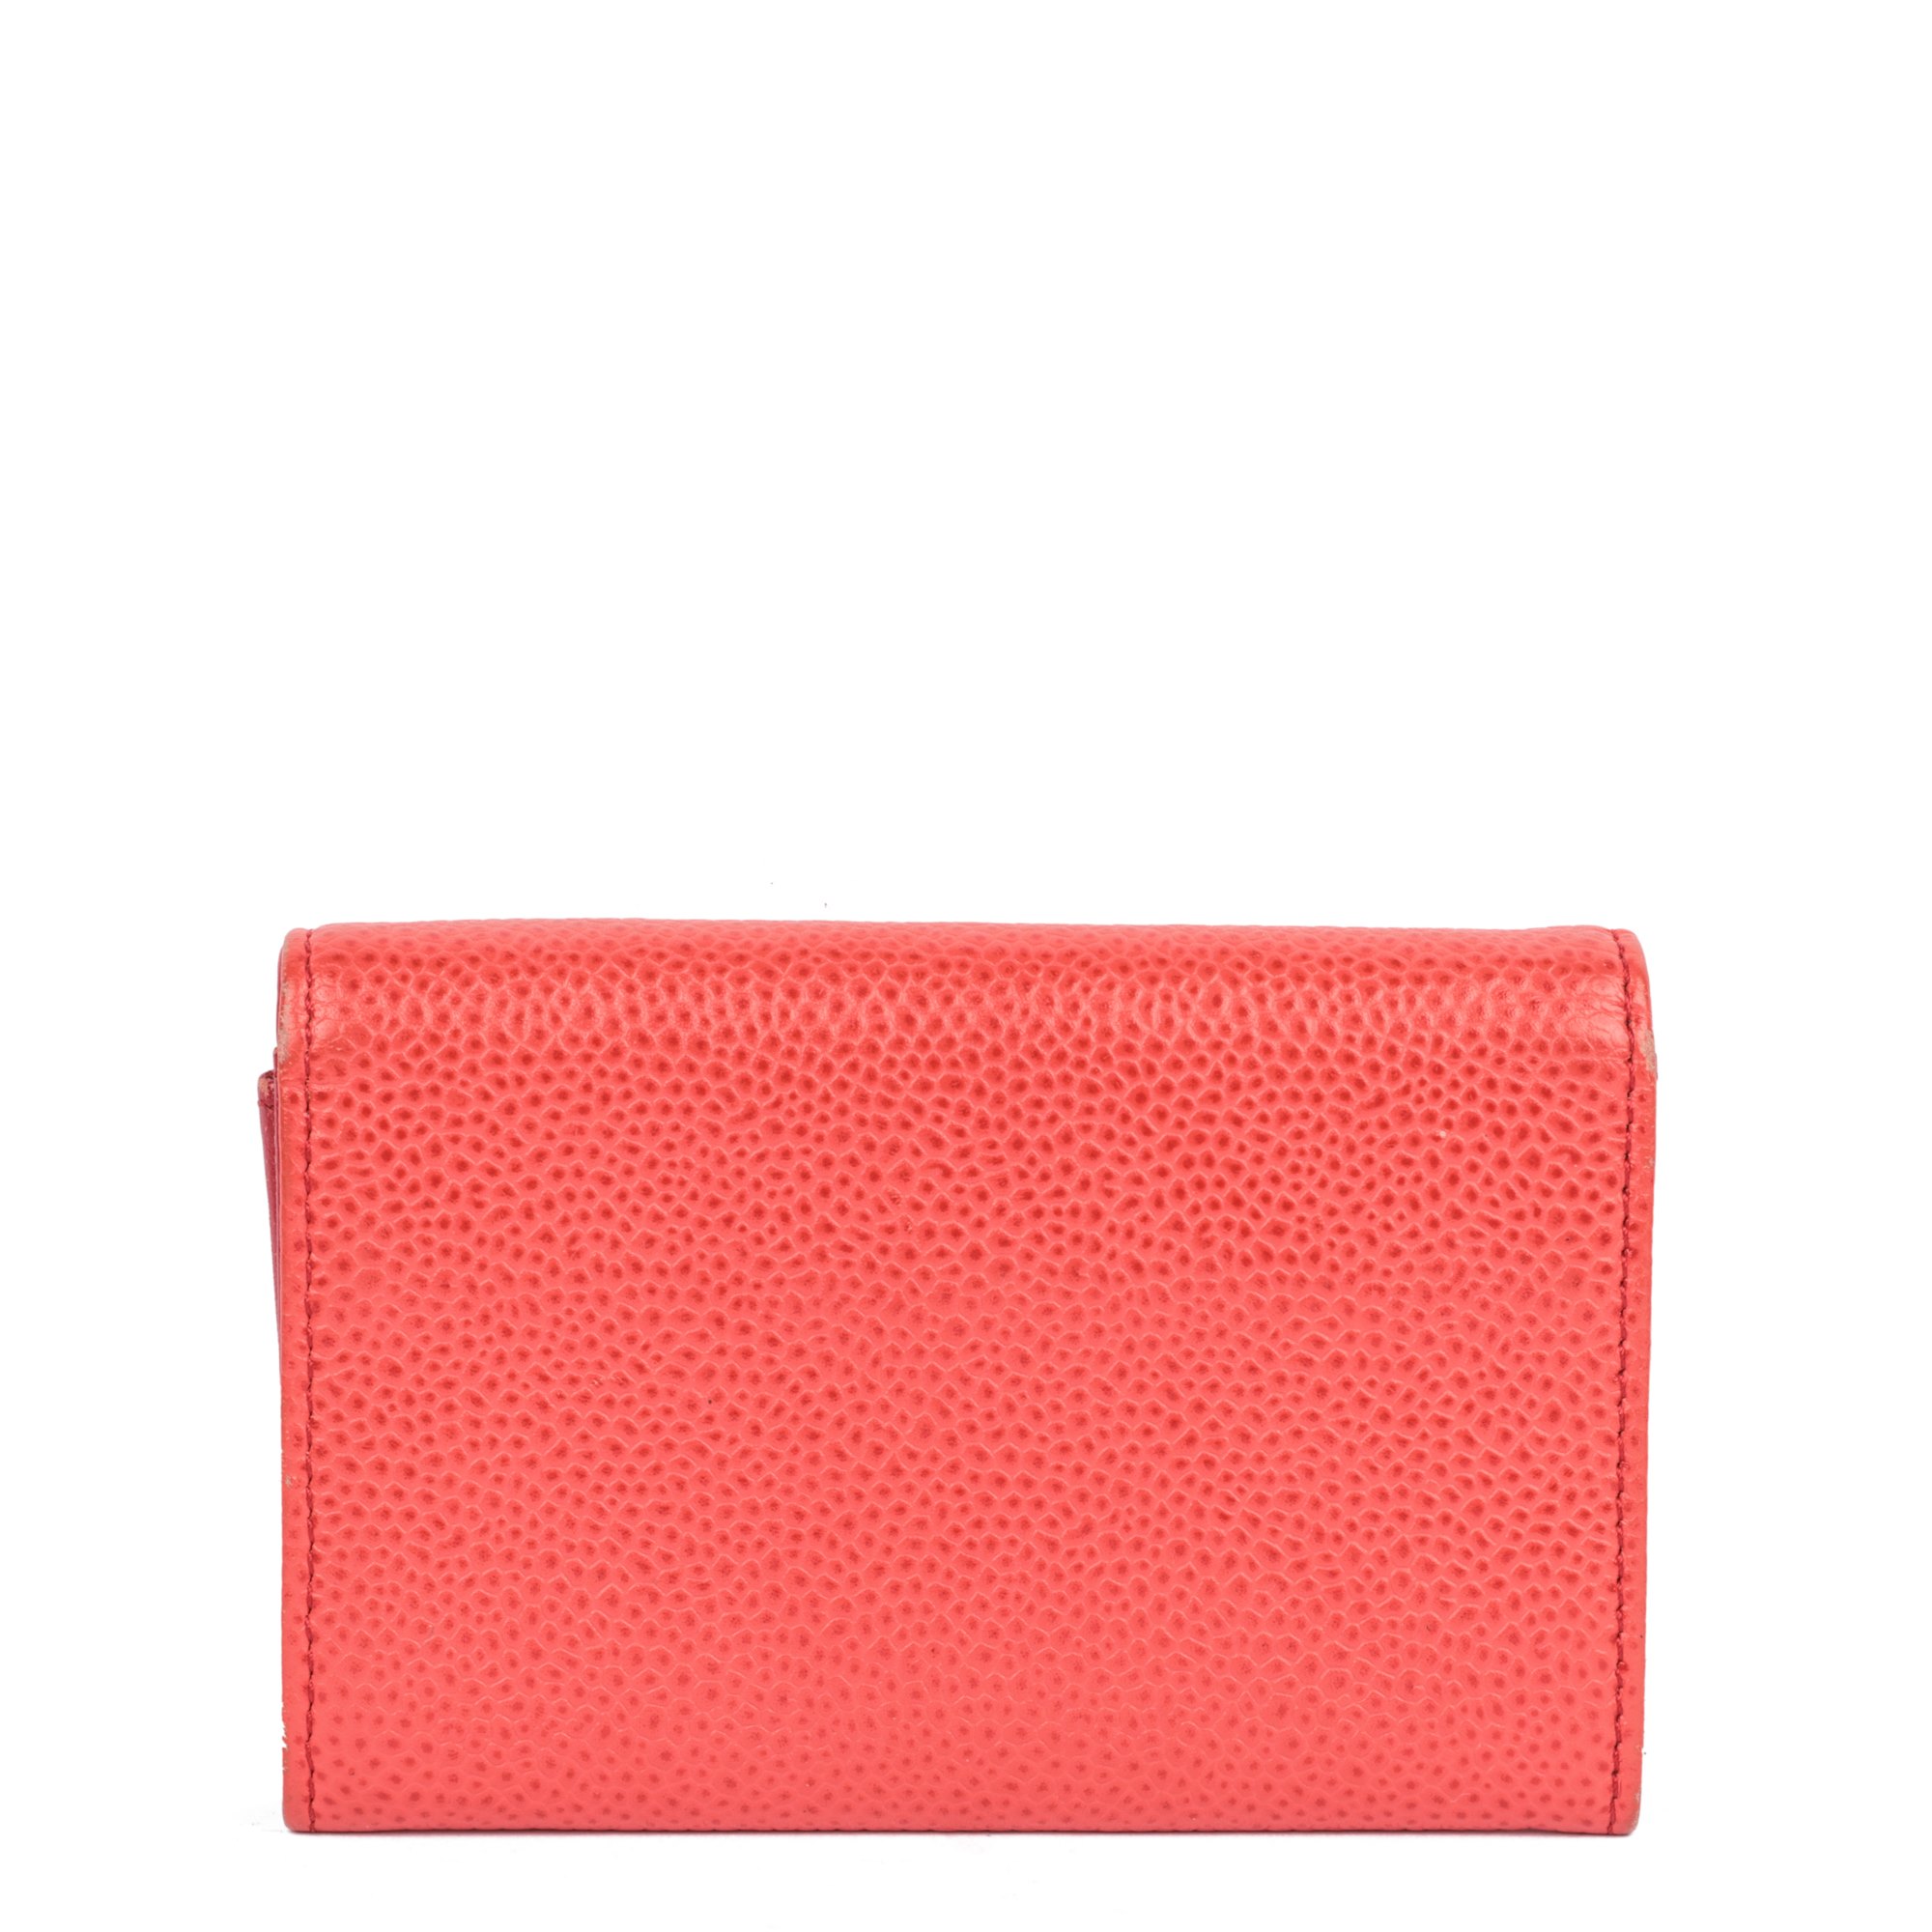 Chanel Red Caviar Leather Timeless Coin Purse